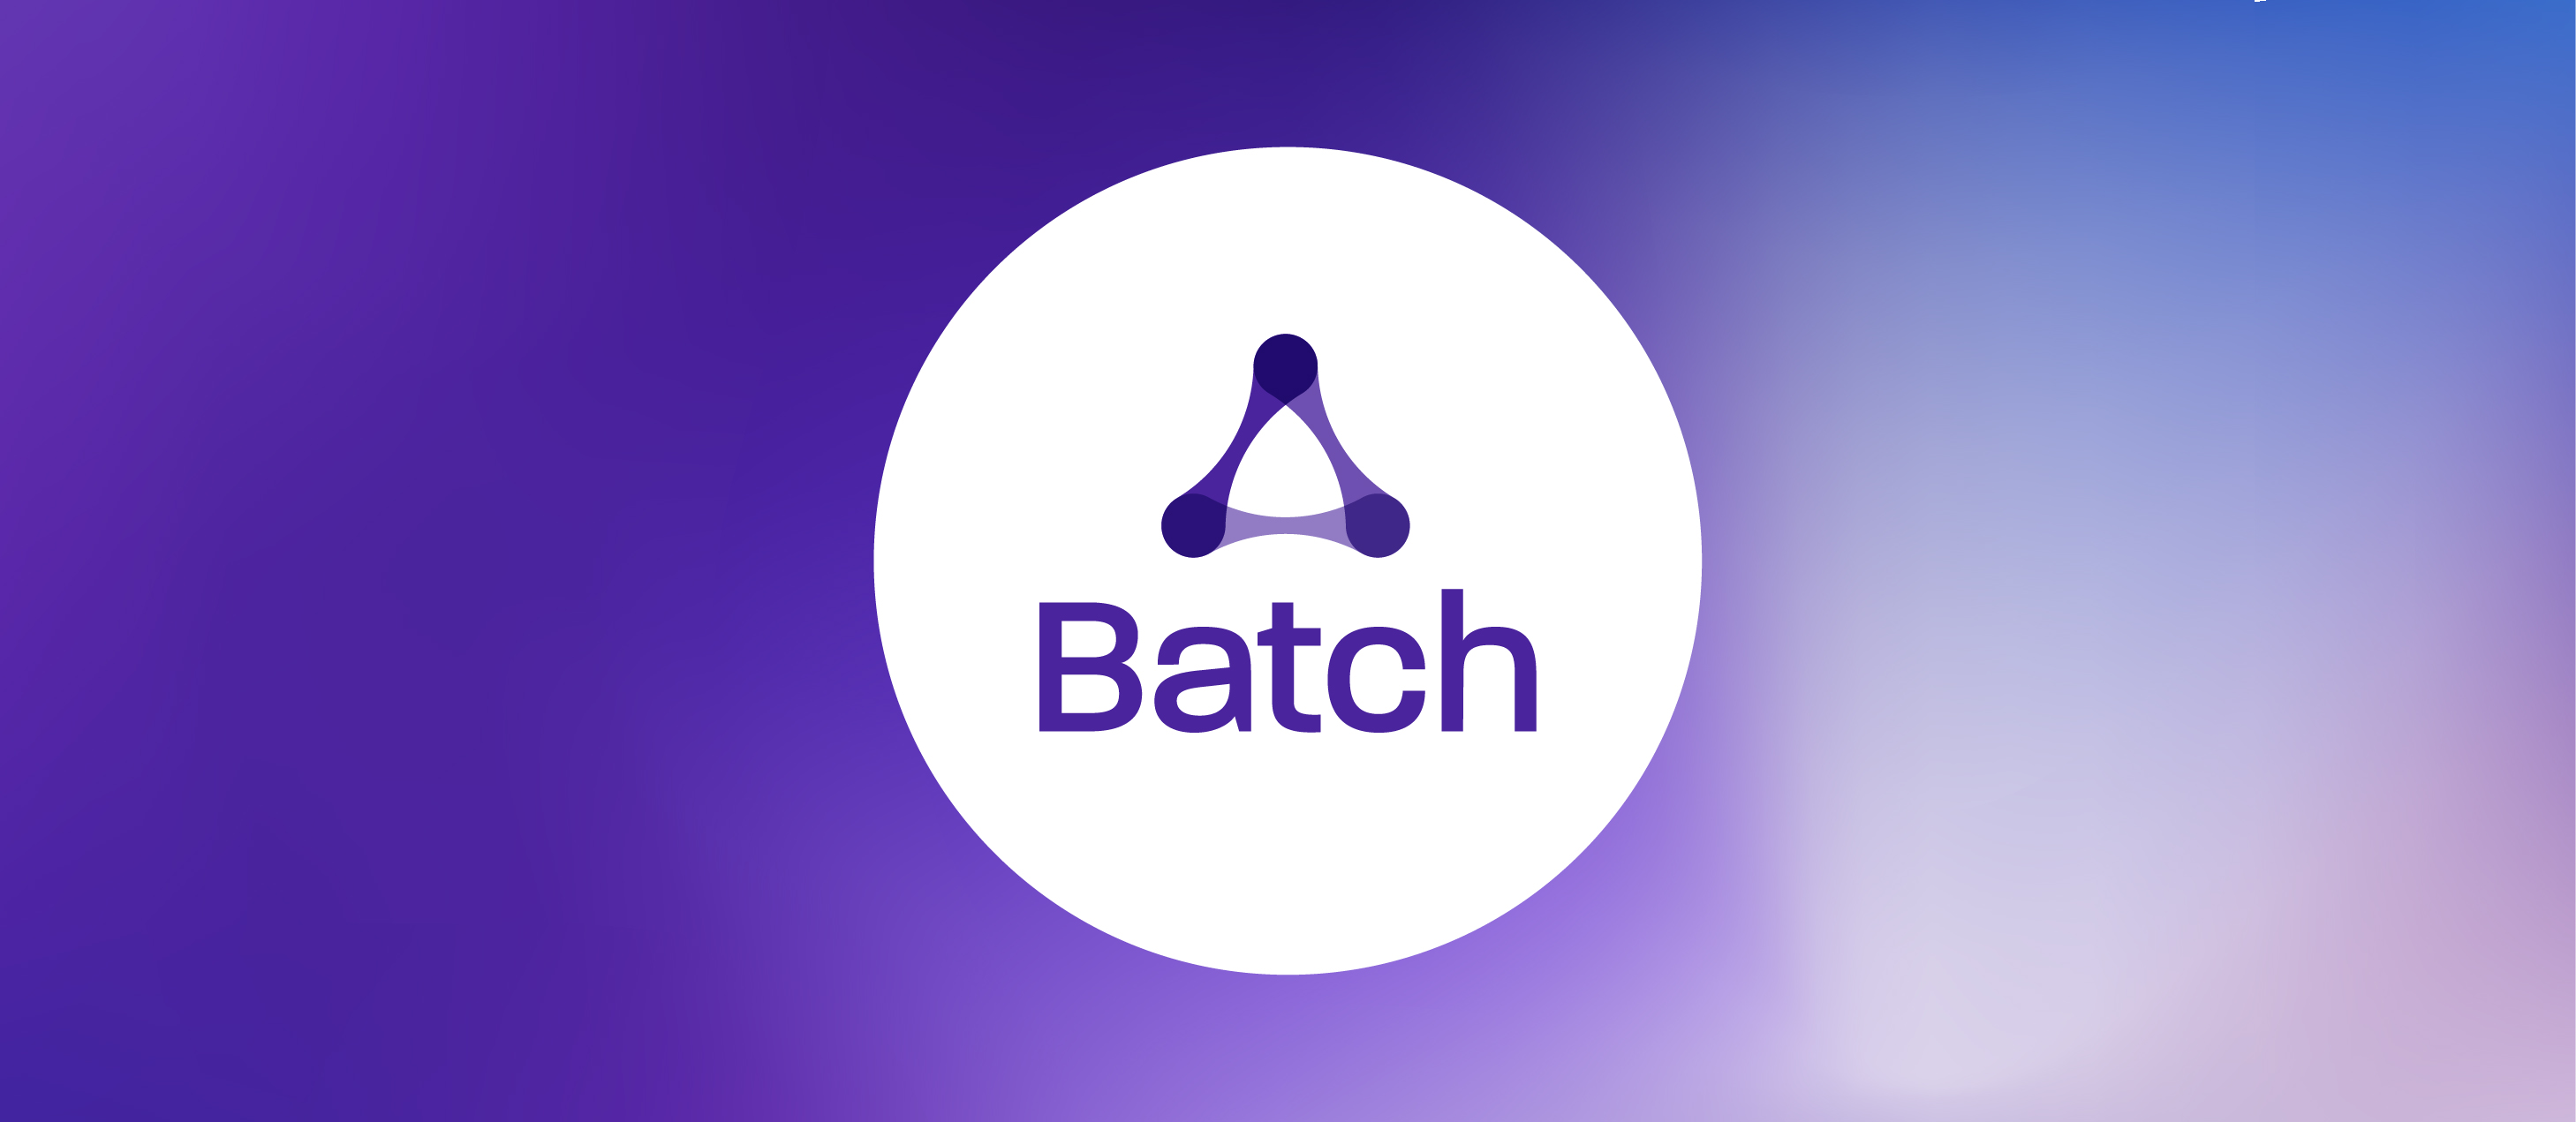 Racami Releases Alchem-e Batch— A New Take on Achieving the Promise of Batch Processing in Print and Mail Operations